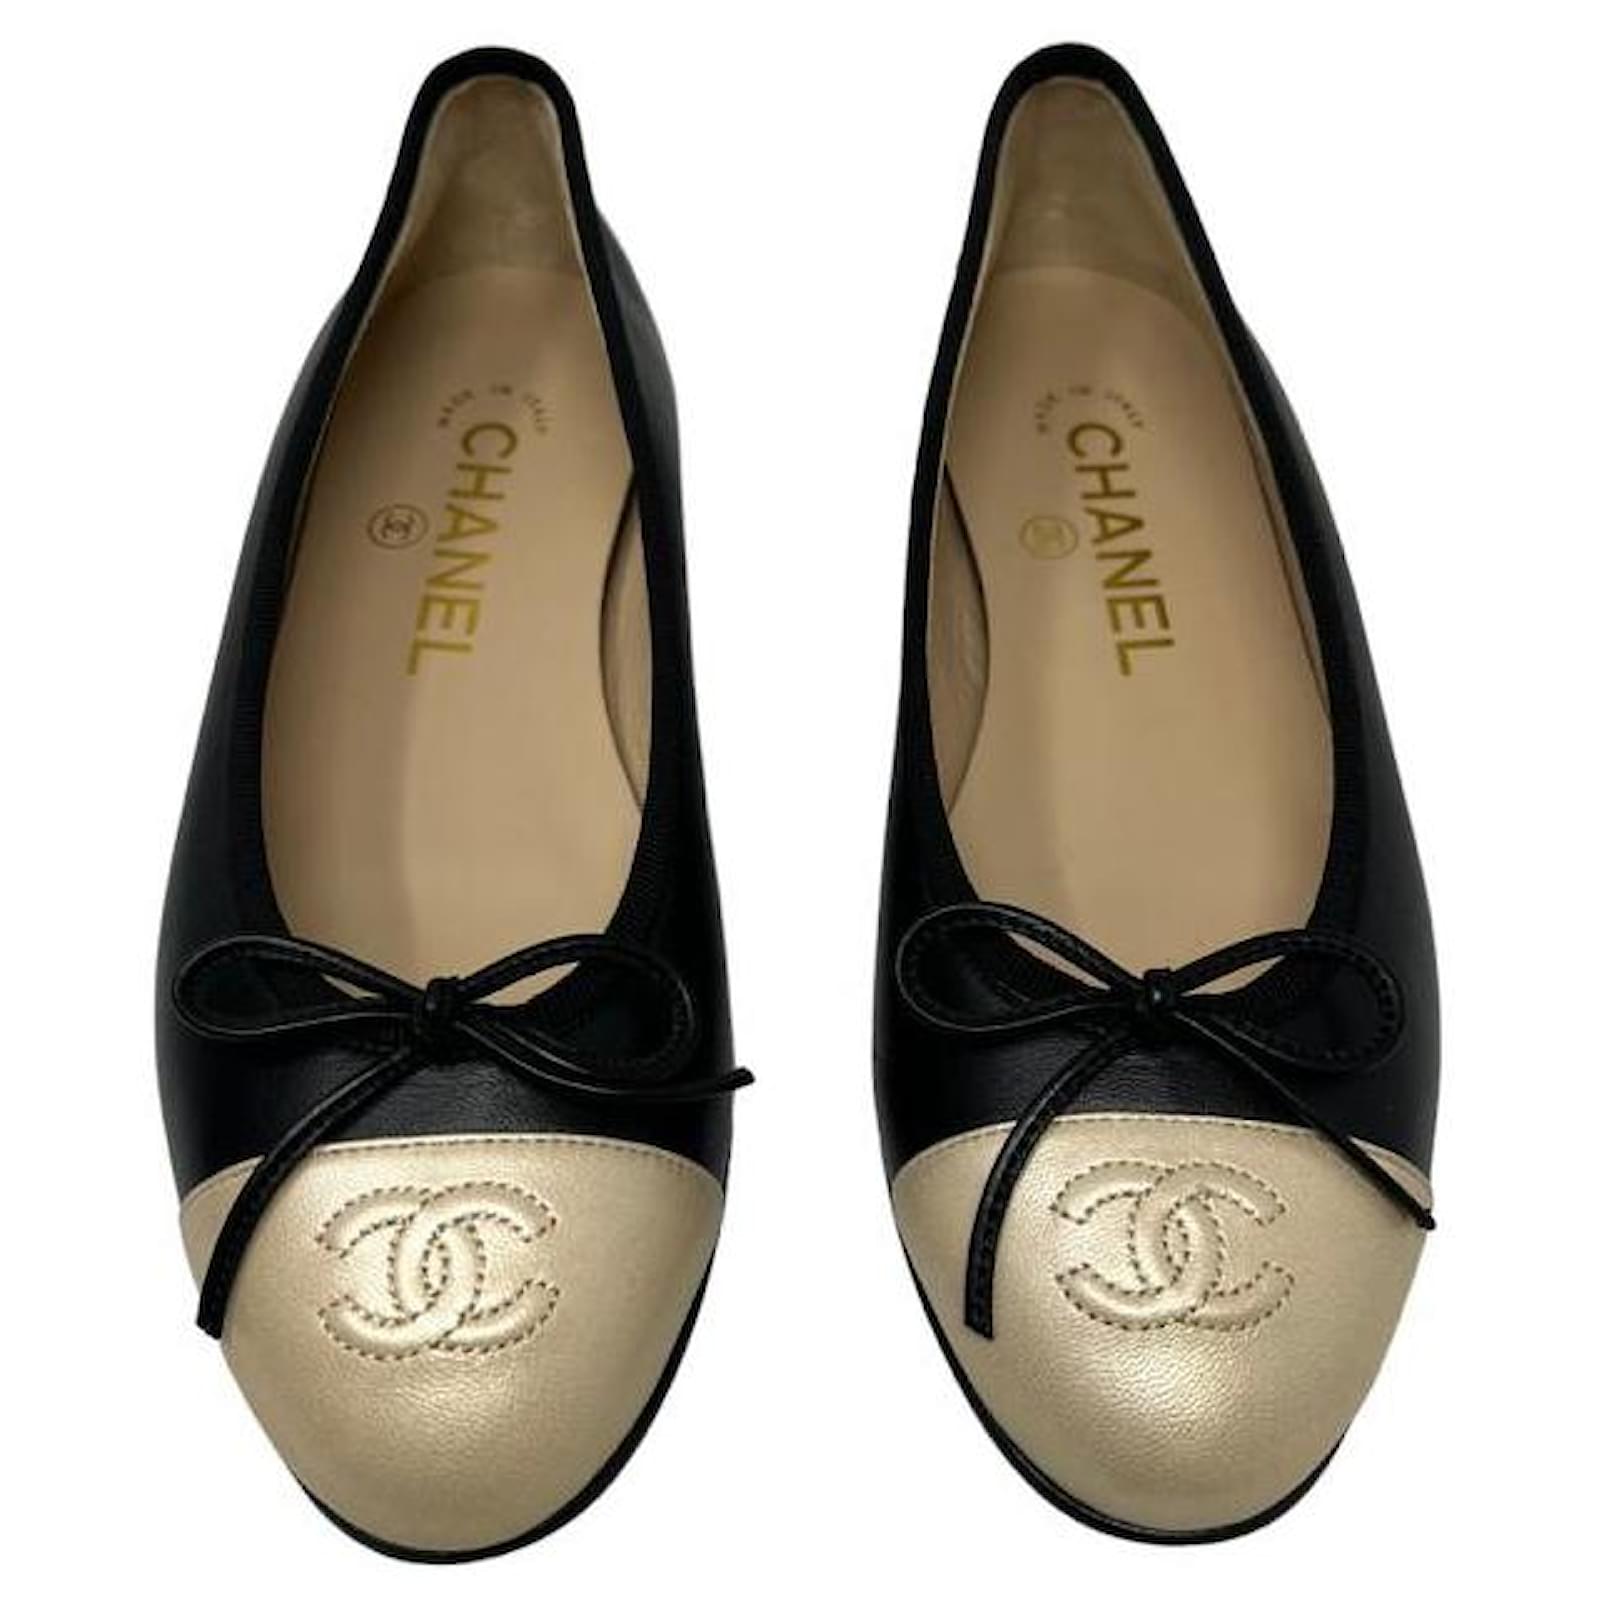 chanel flats beige and black